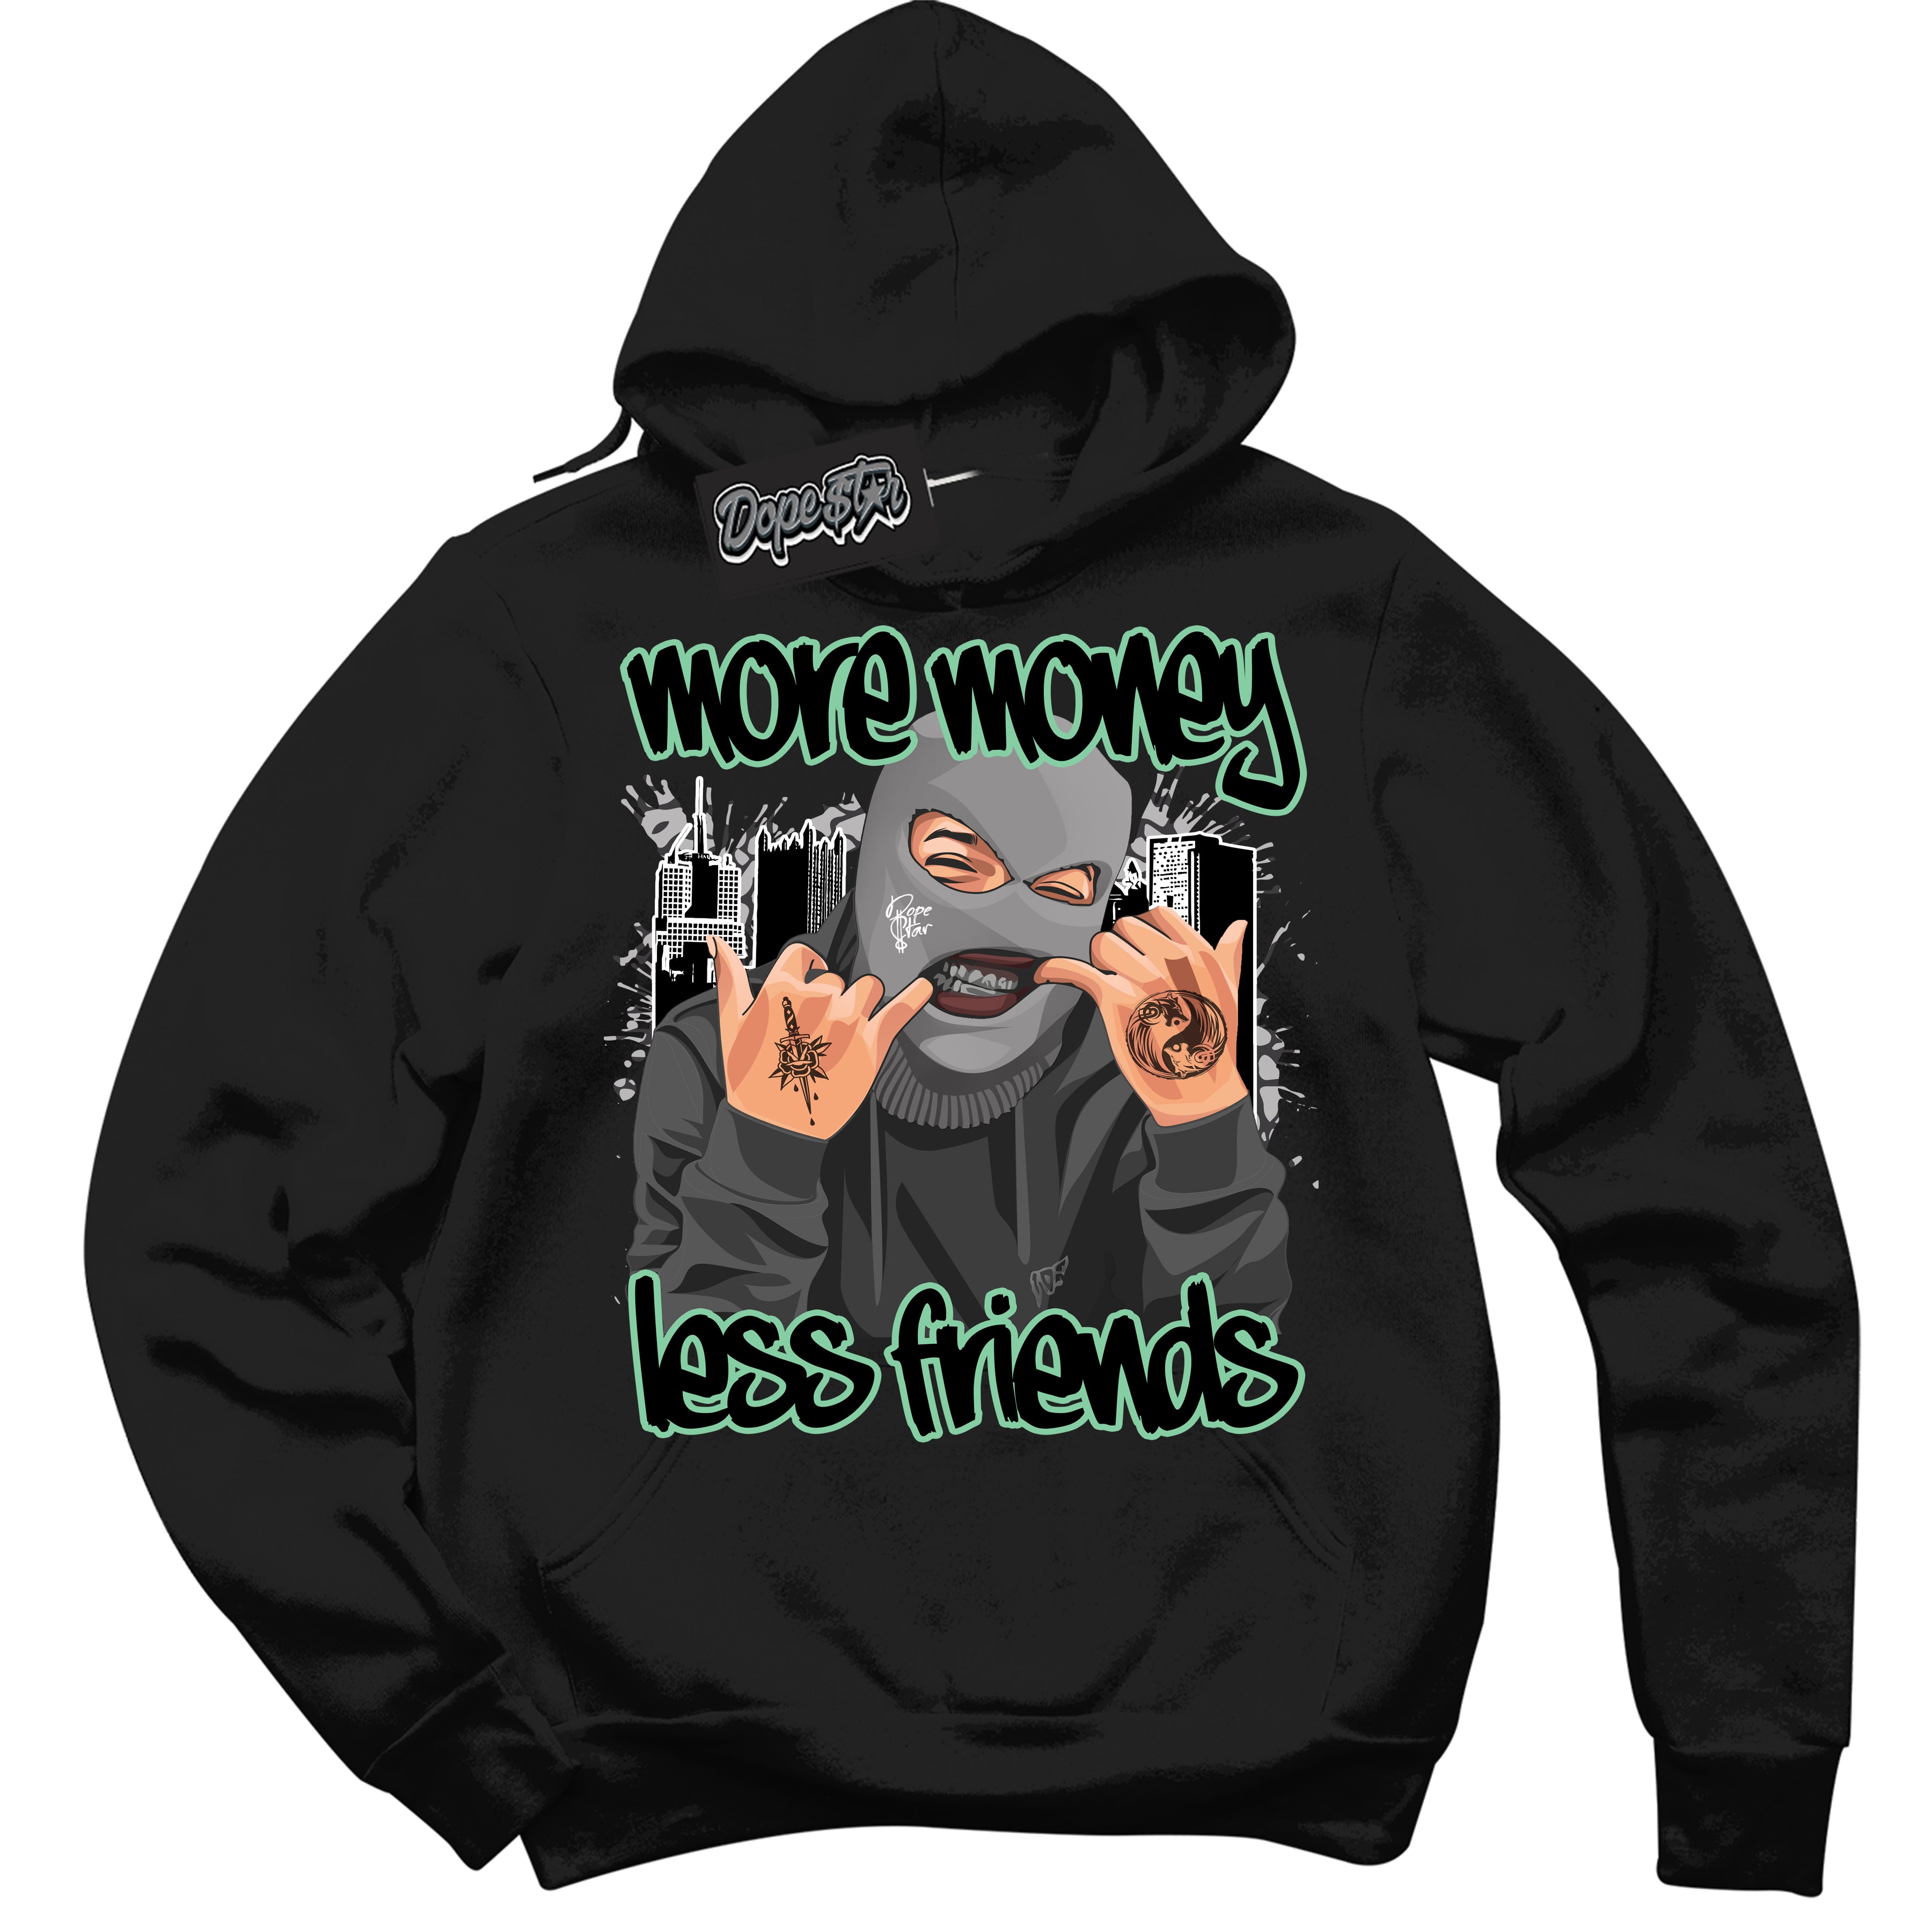 Cool Black Graphic DopeStar Hoodie with “ More Money Less Friends “ print, that perfectly matches Green Glow 3S sneakers